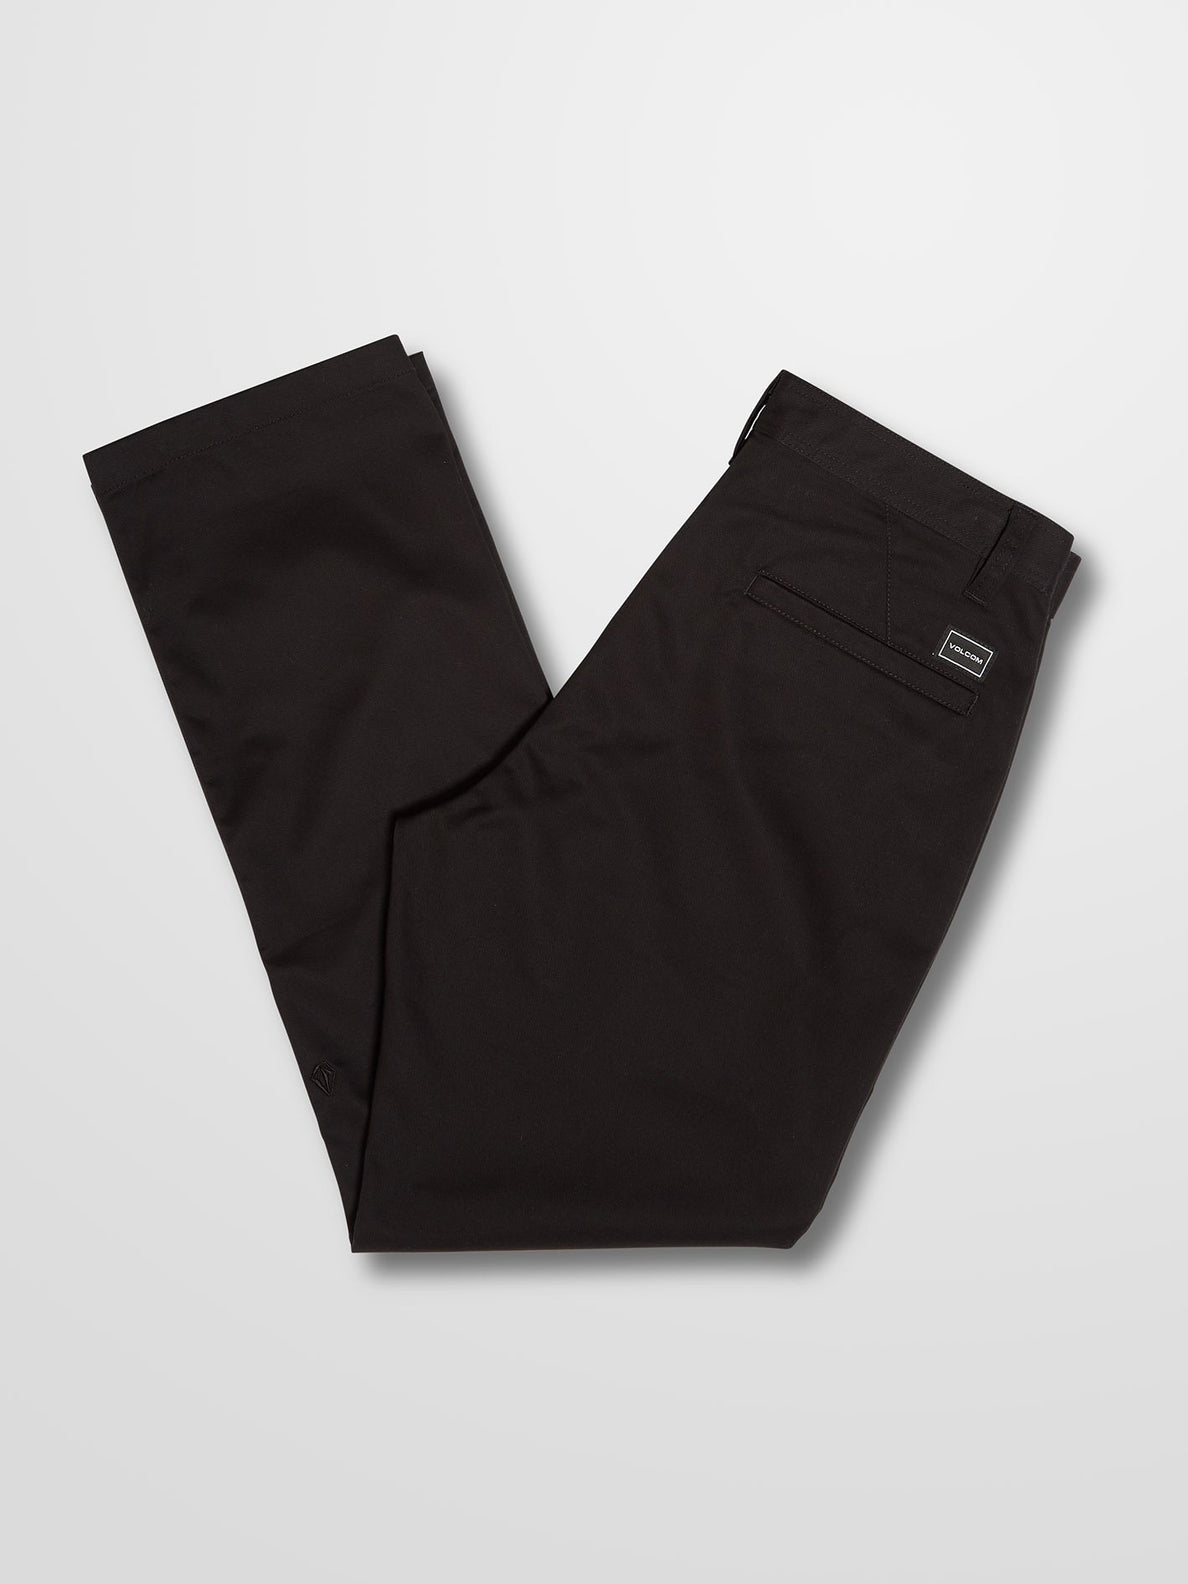 Substance Chino Pant - Black (A1112104_BLK) [2]